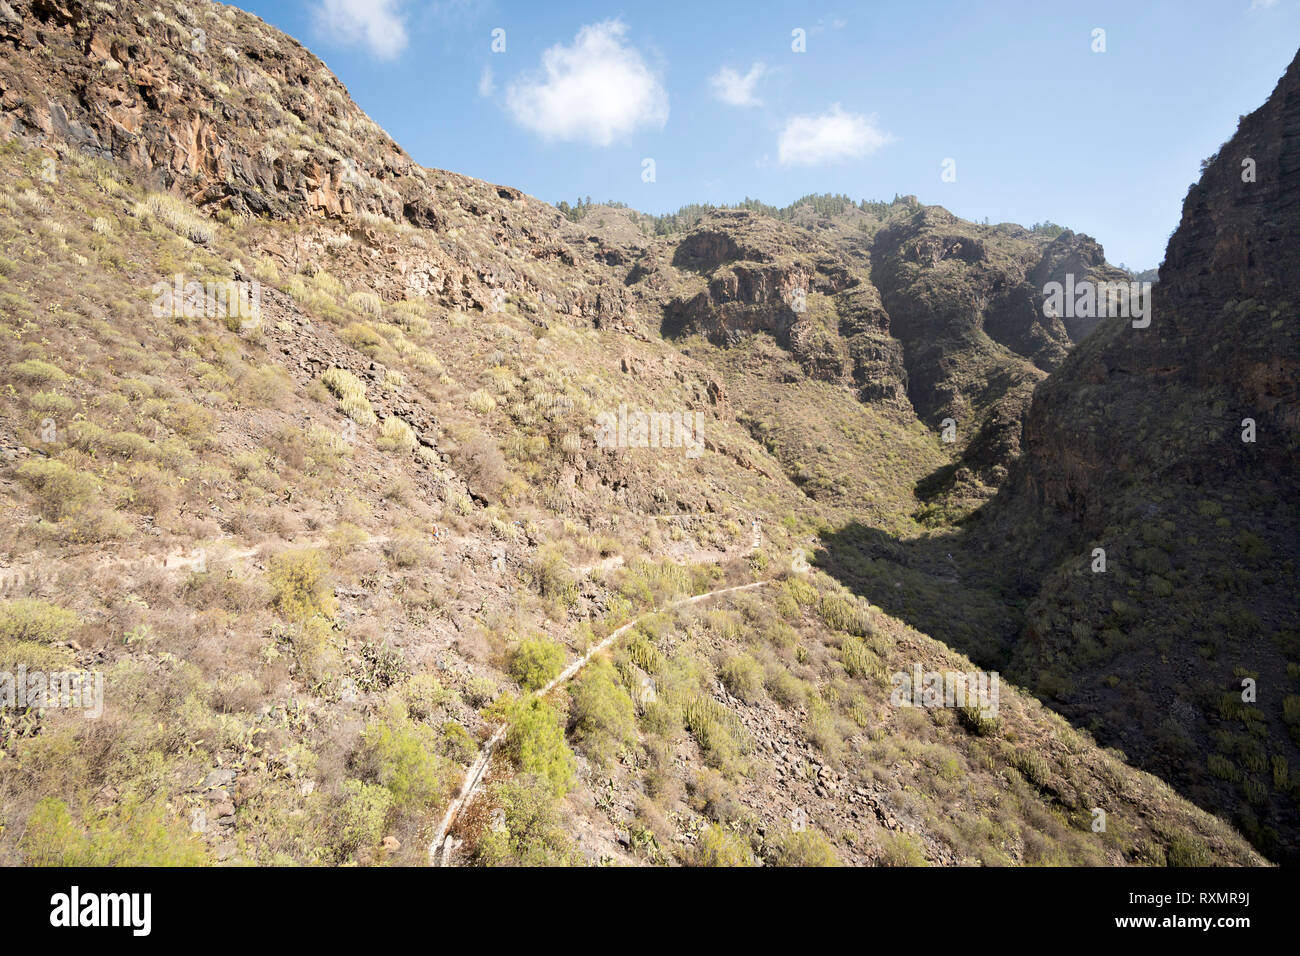 Groups of walkers follow the footpath along the gorge called the Barranco del Infierno, Adeje, Tenerife. Stock Photo